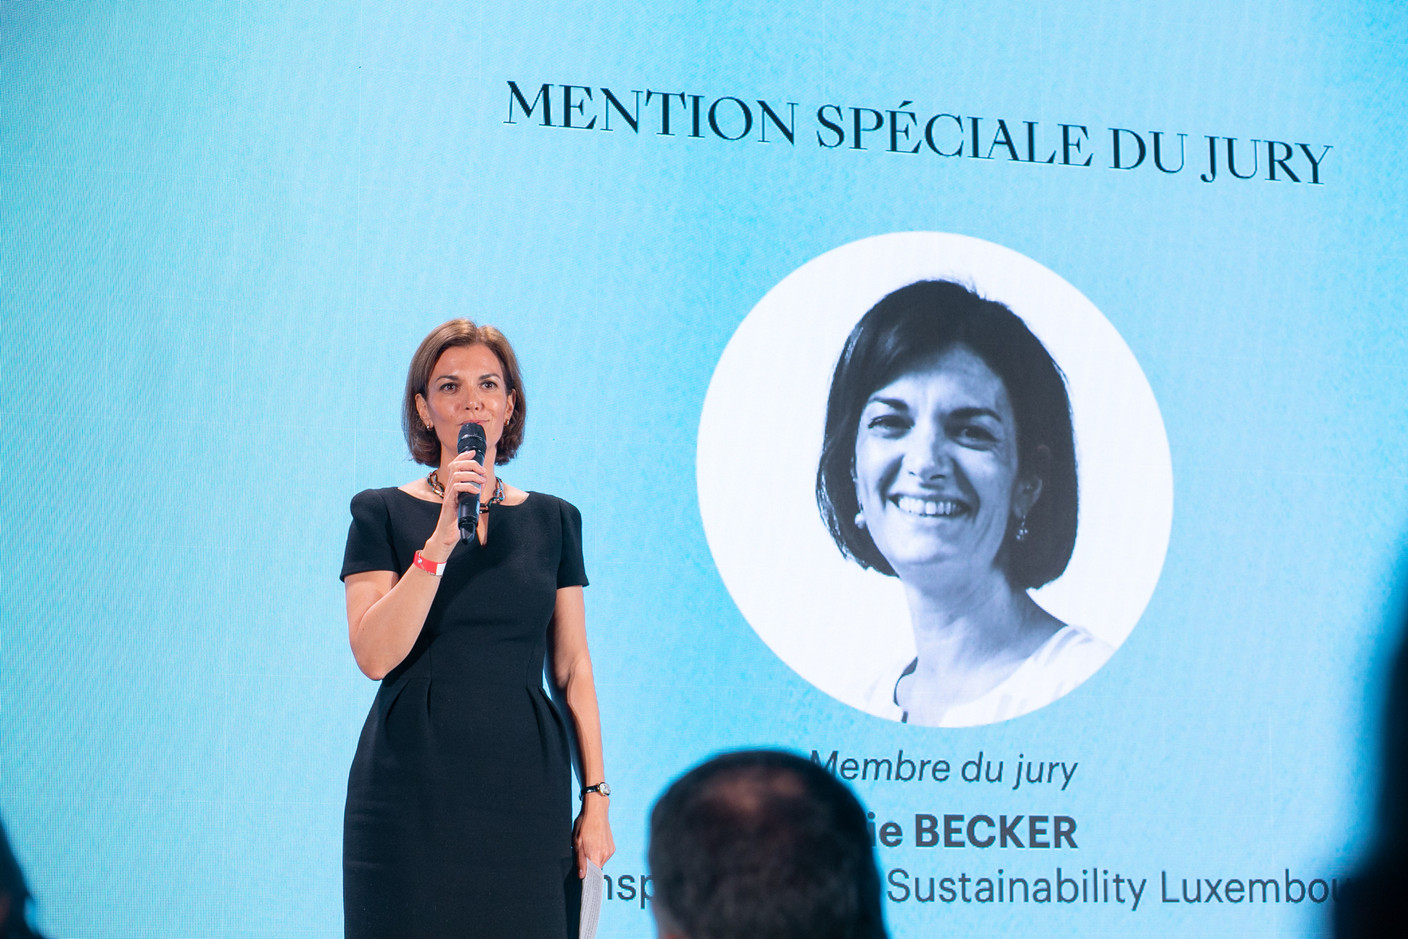 The CEO of the Luxembourg Stock Exchange, Julie Becker, was a member of the jury. (Photo: Matic Zorman/Maison Moderne)